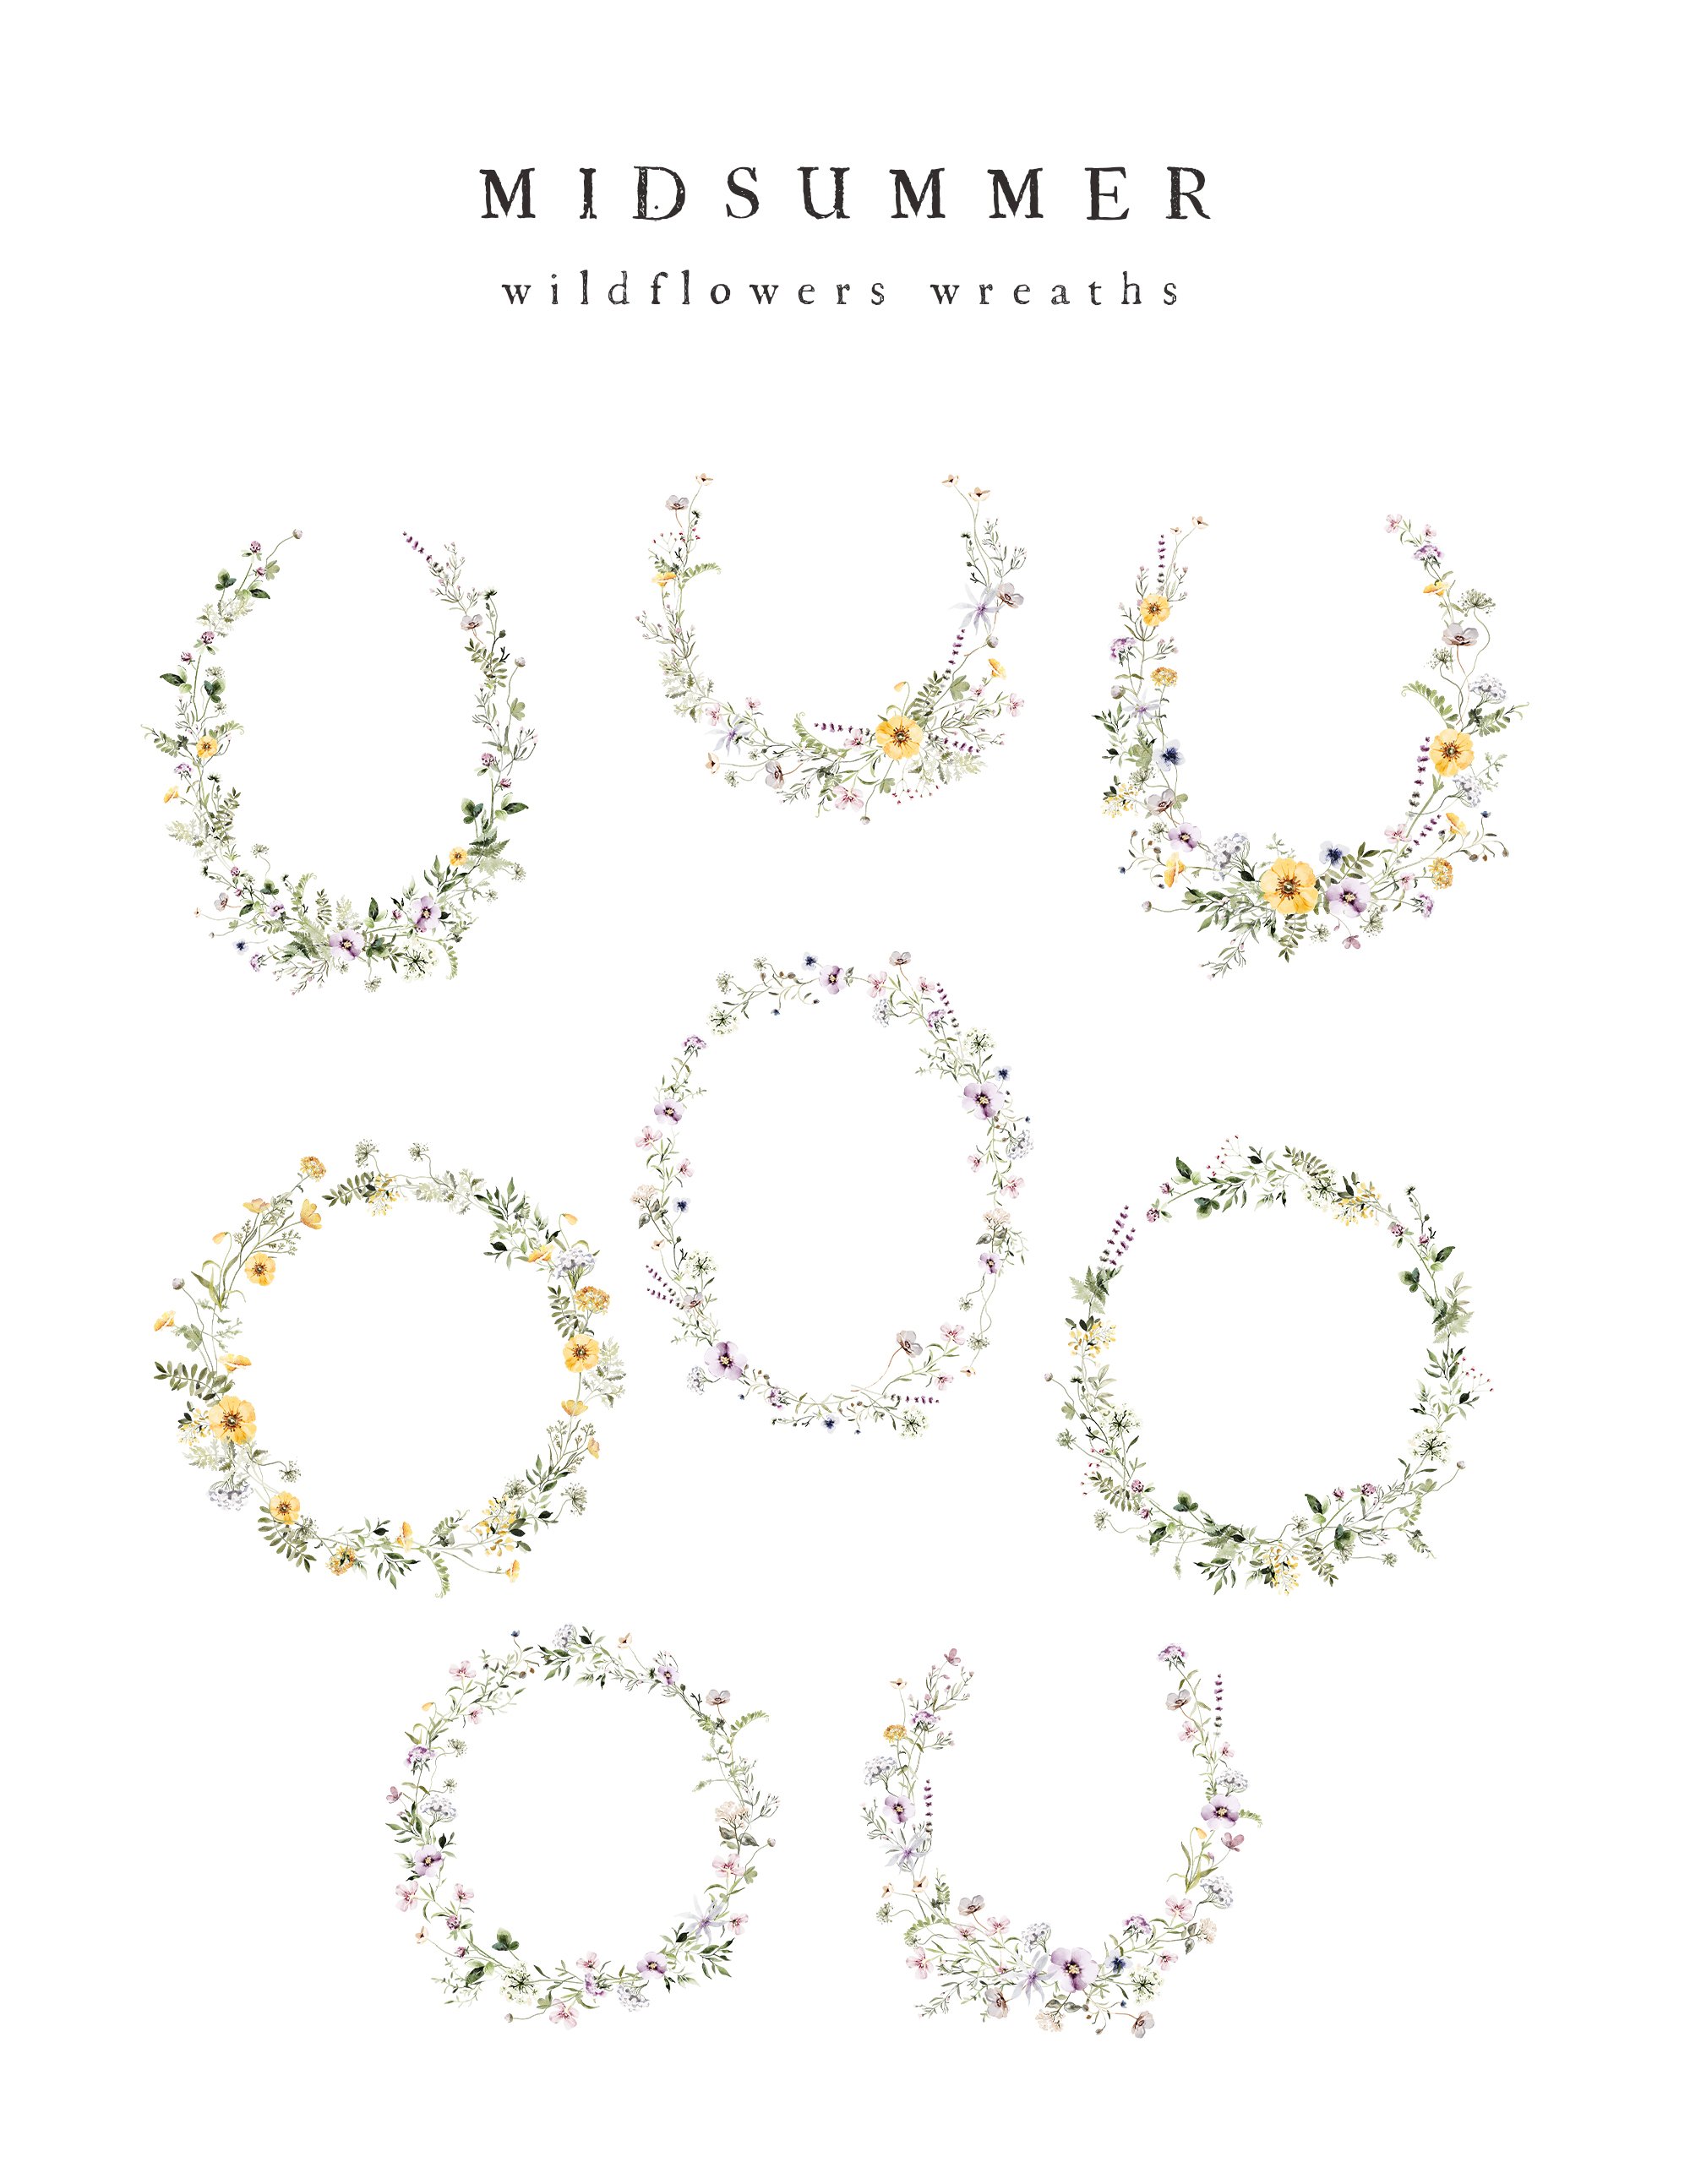 Delicate wildflowers wreathes.